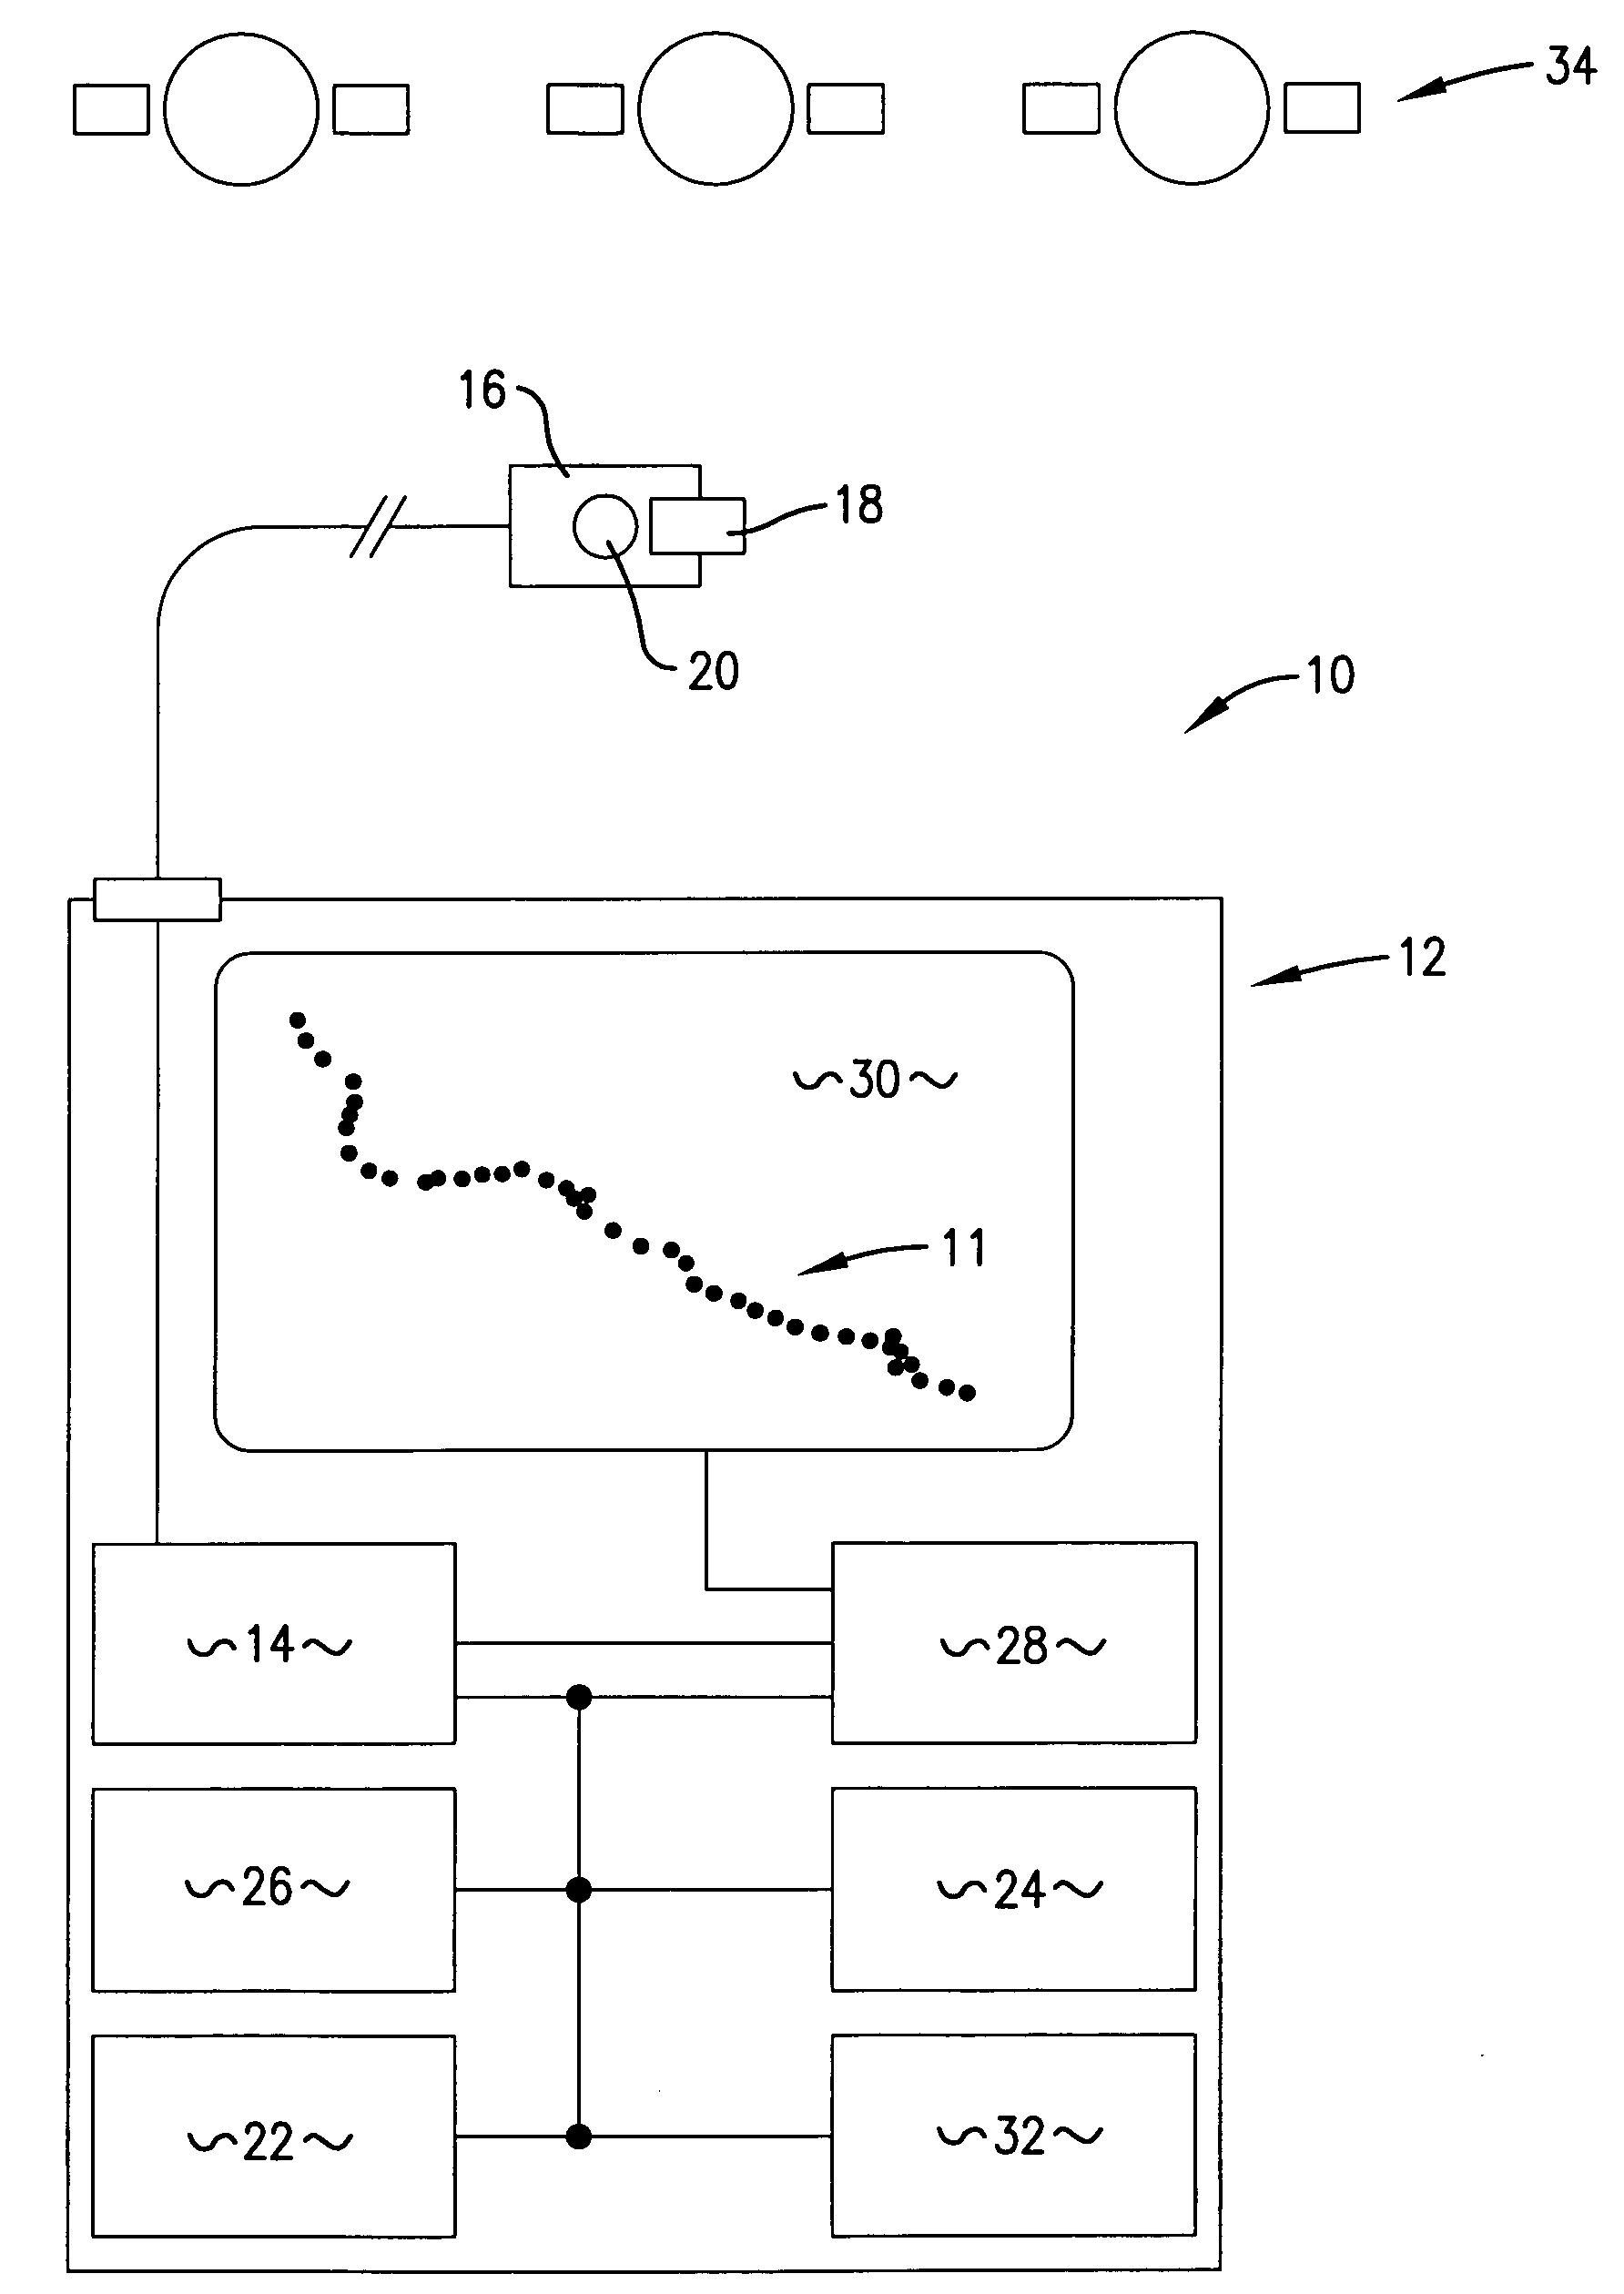 Apparatus and method for allowing user to track path of travel over extended period of time